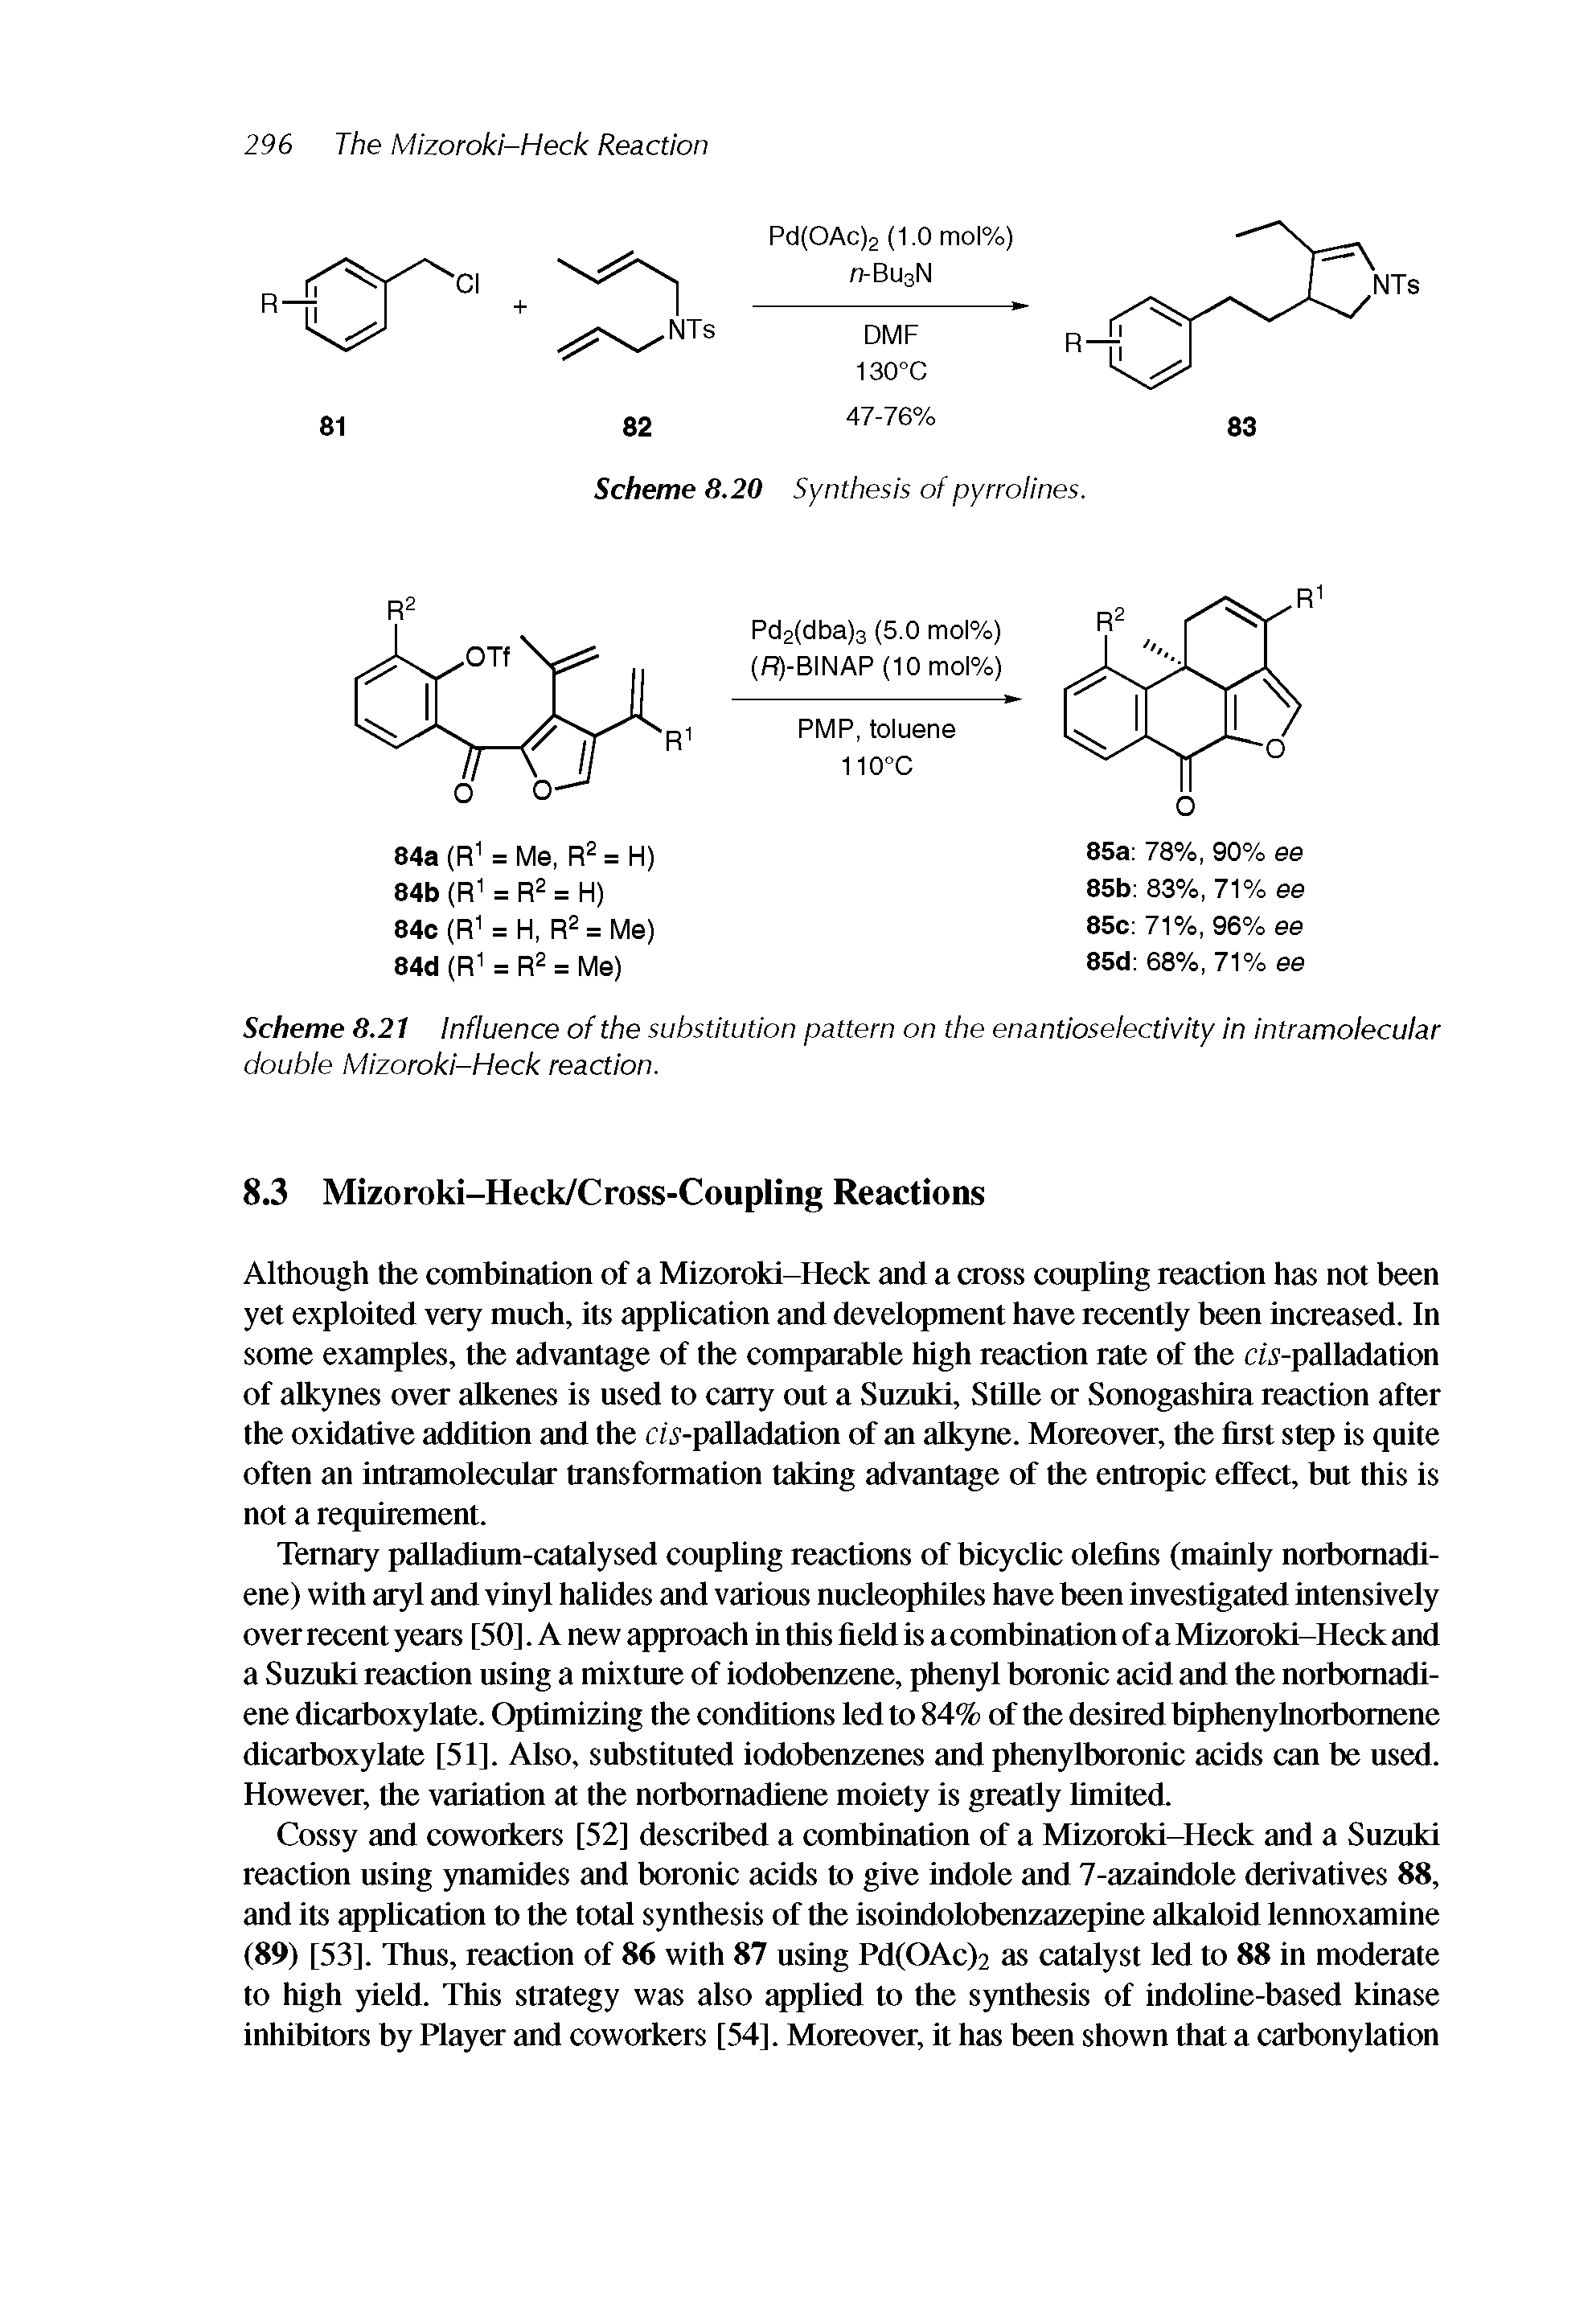 Scheme 8.21 Influence of the substitution pattern on the enantioselectivity in intramolecular double Mizoroki-Heck reaction.